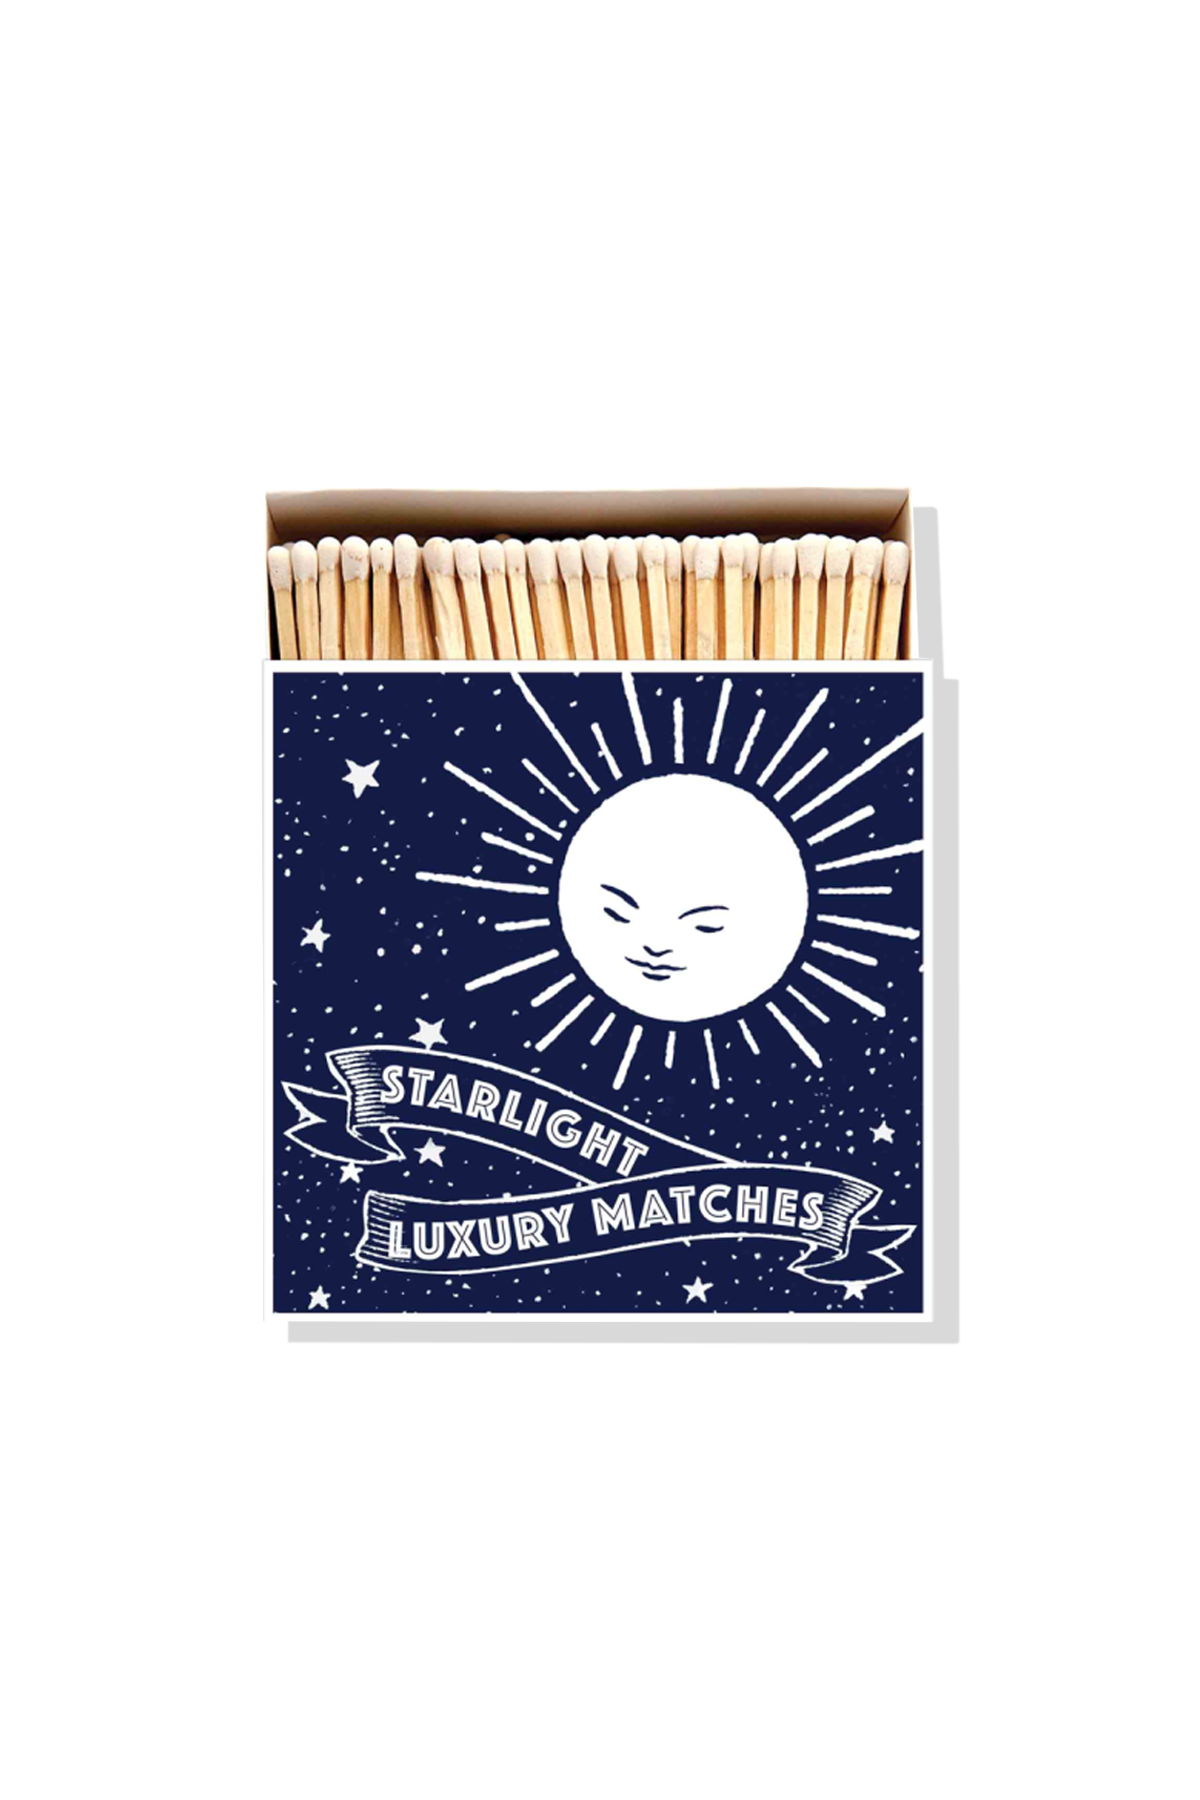 Starlight-Archivist-Matches.png